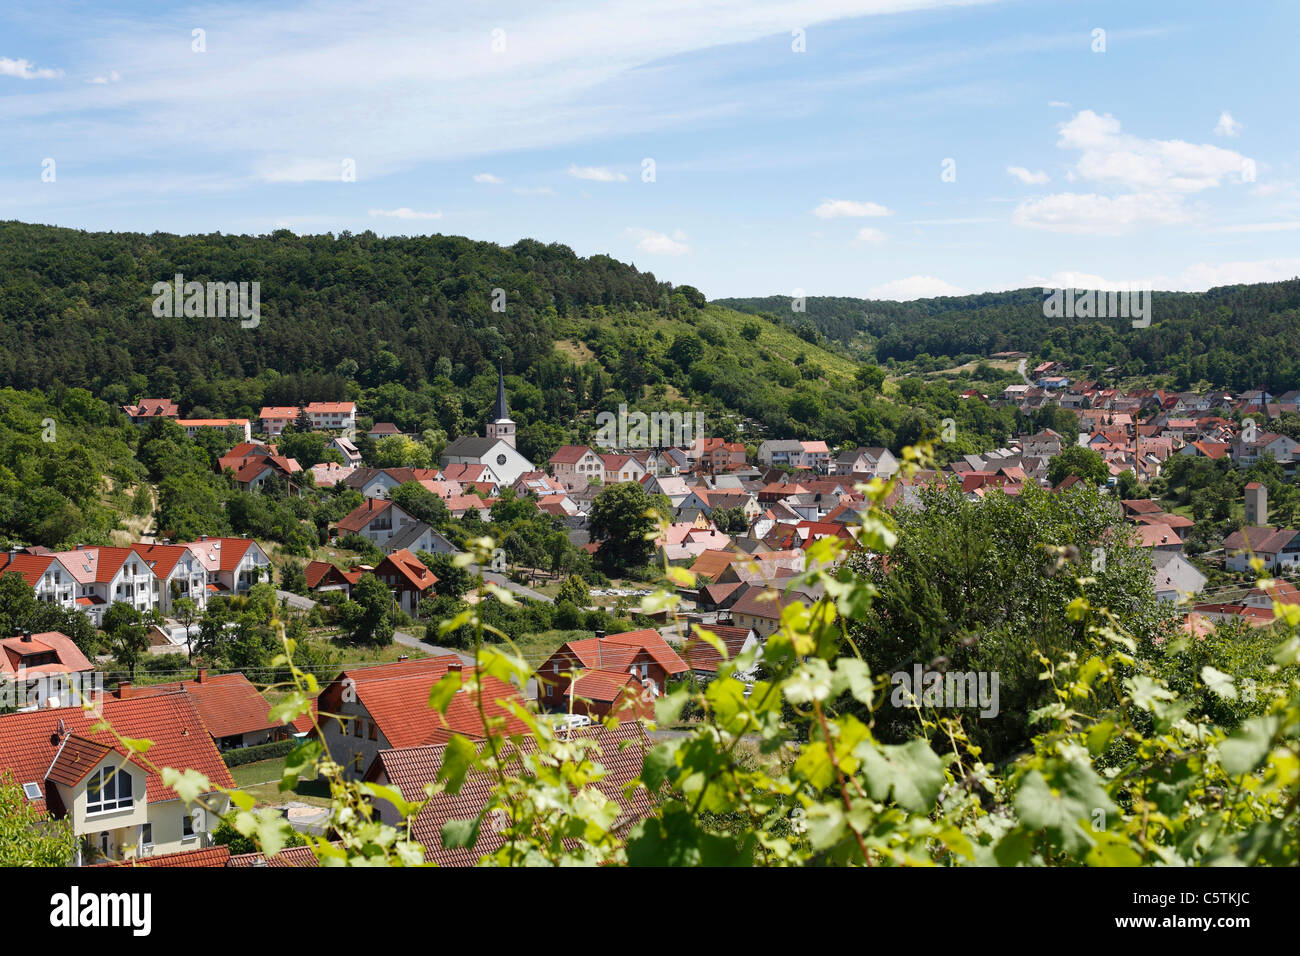 Germany, Bavaria, Lower Franconia, View of buildings with mountains Stock Photo